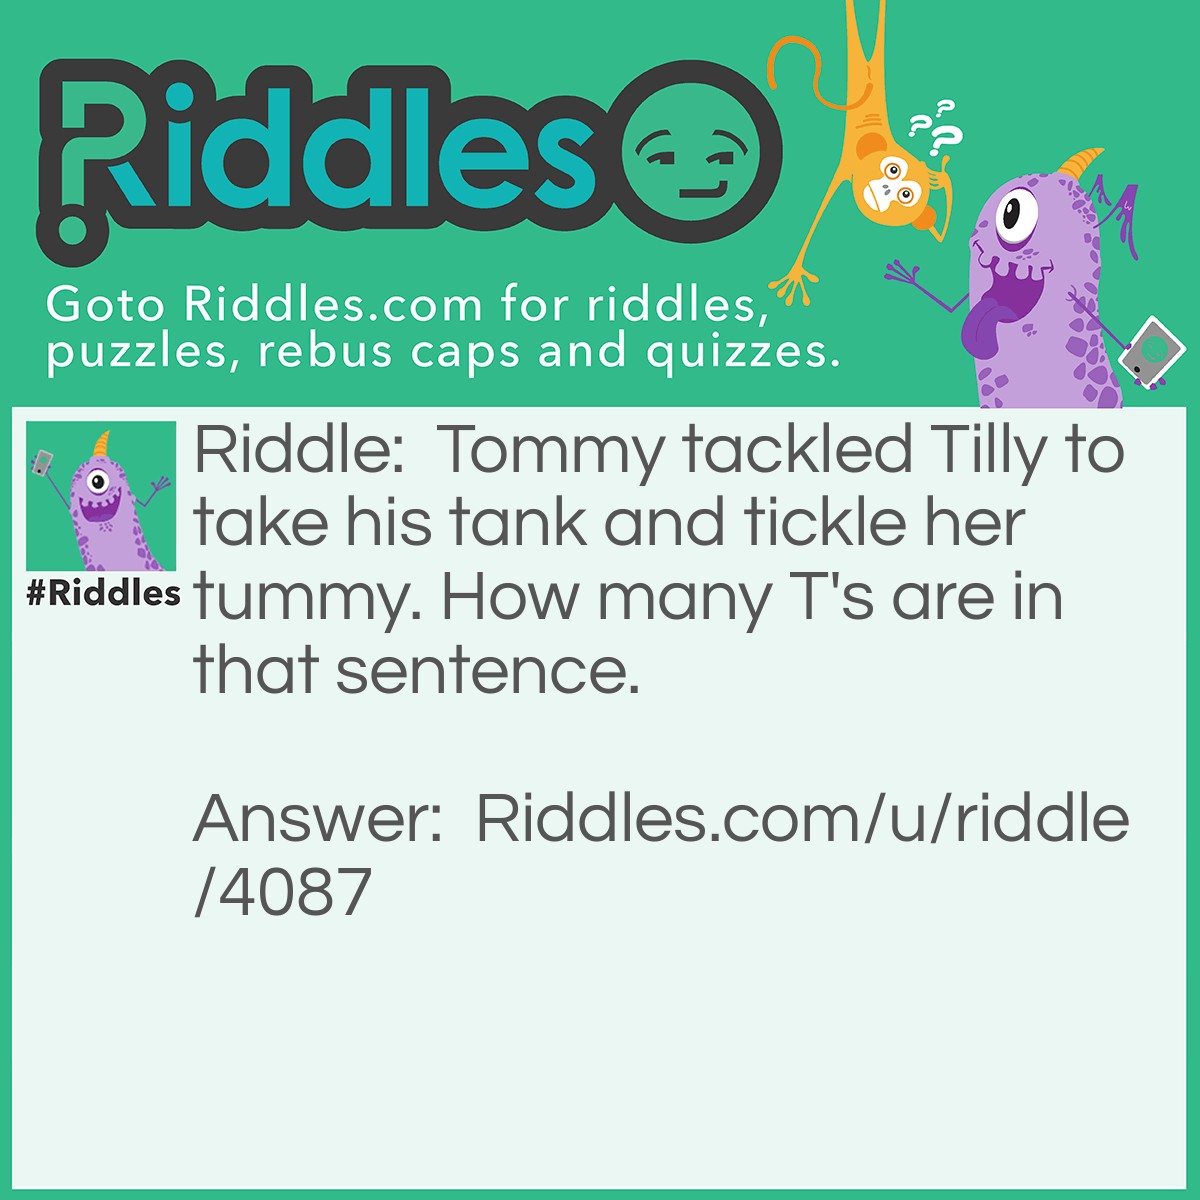 Riddle: Tommy tackled Tilly to take his tank and tickle her tummy. How many T's are in that sentence. Answer: 3- I asked how many T's were in 'that sentence'.